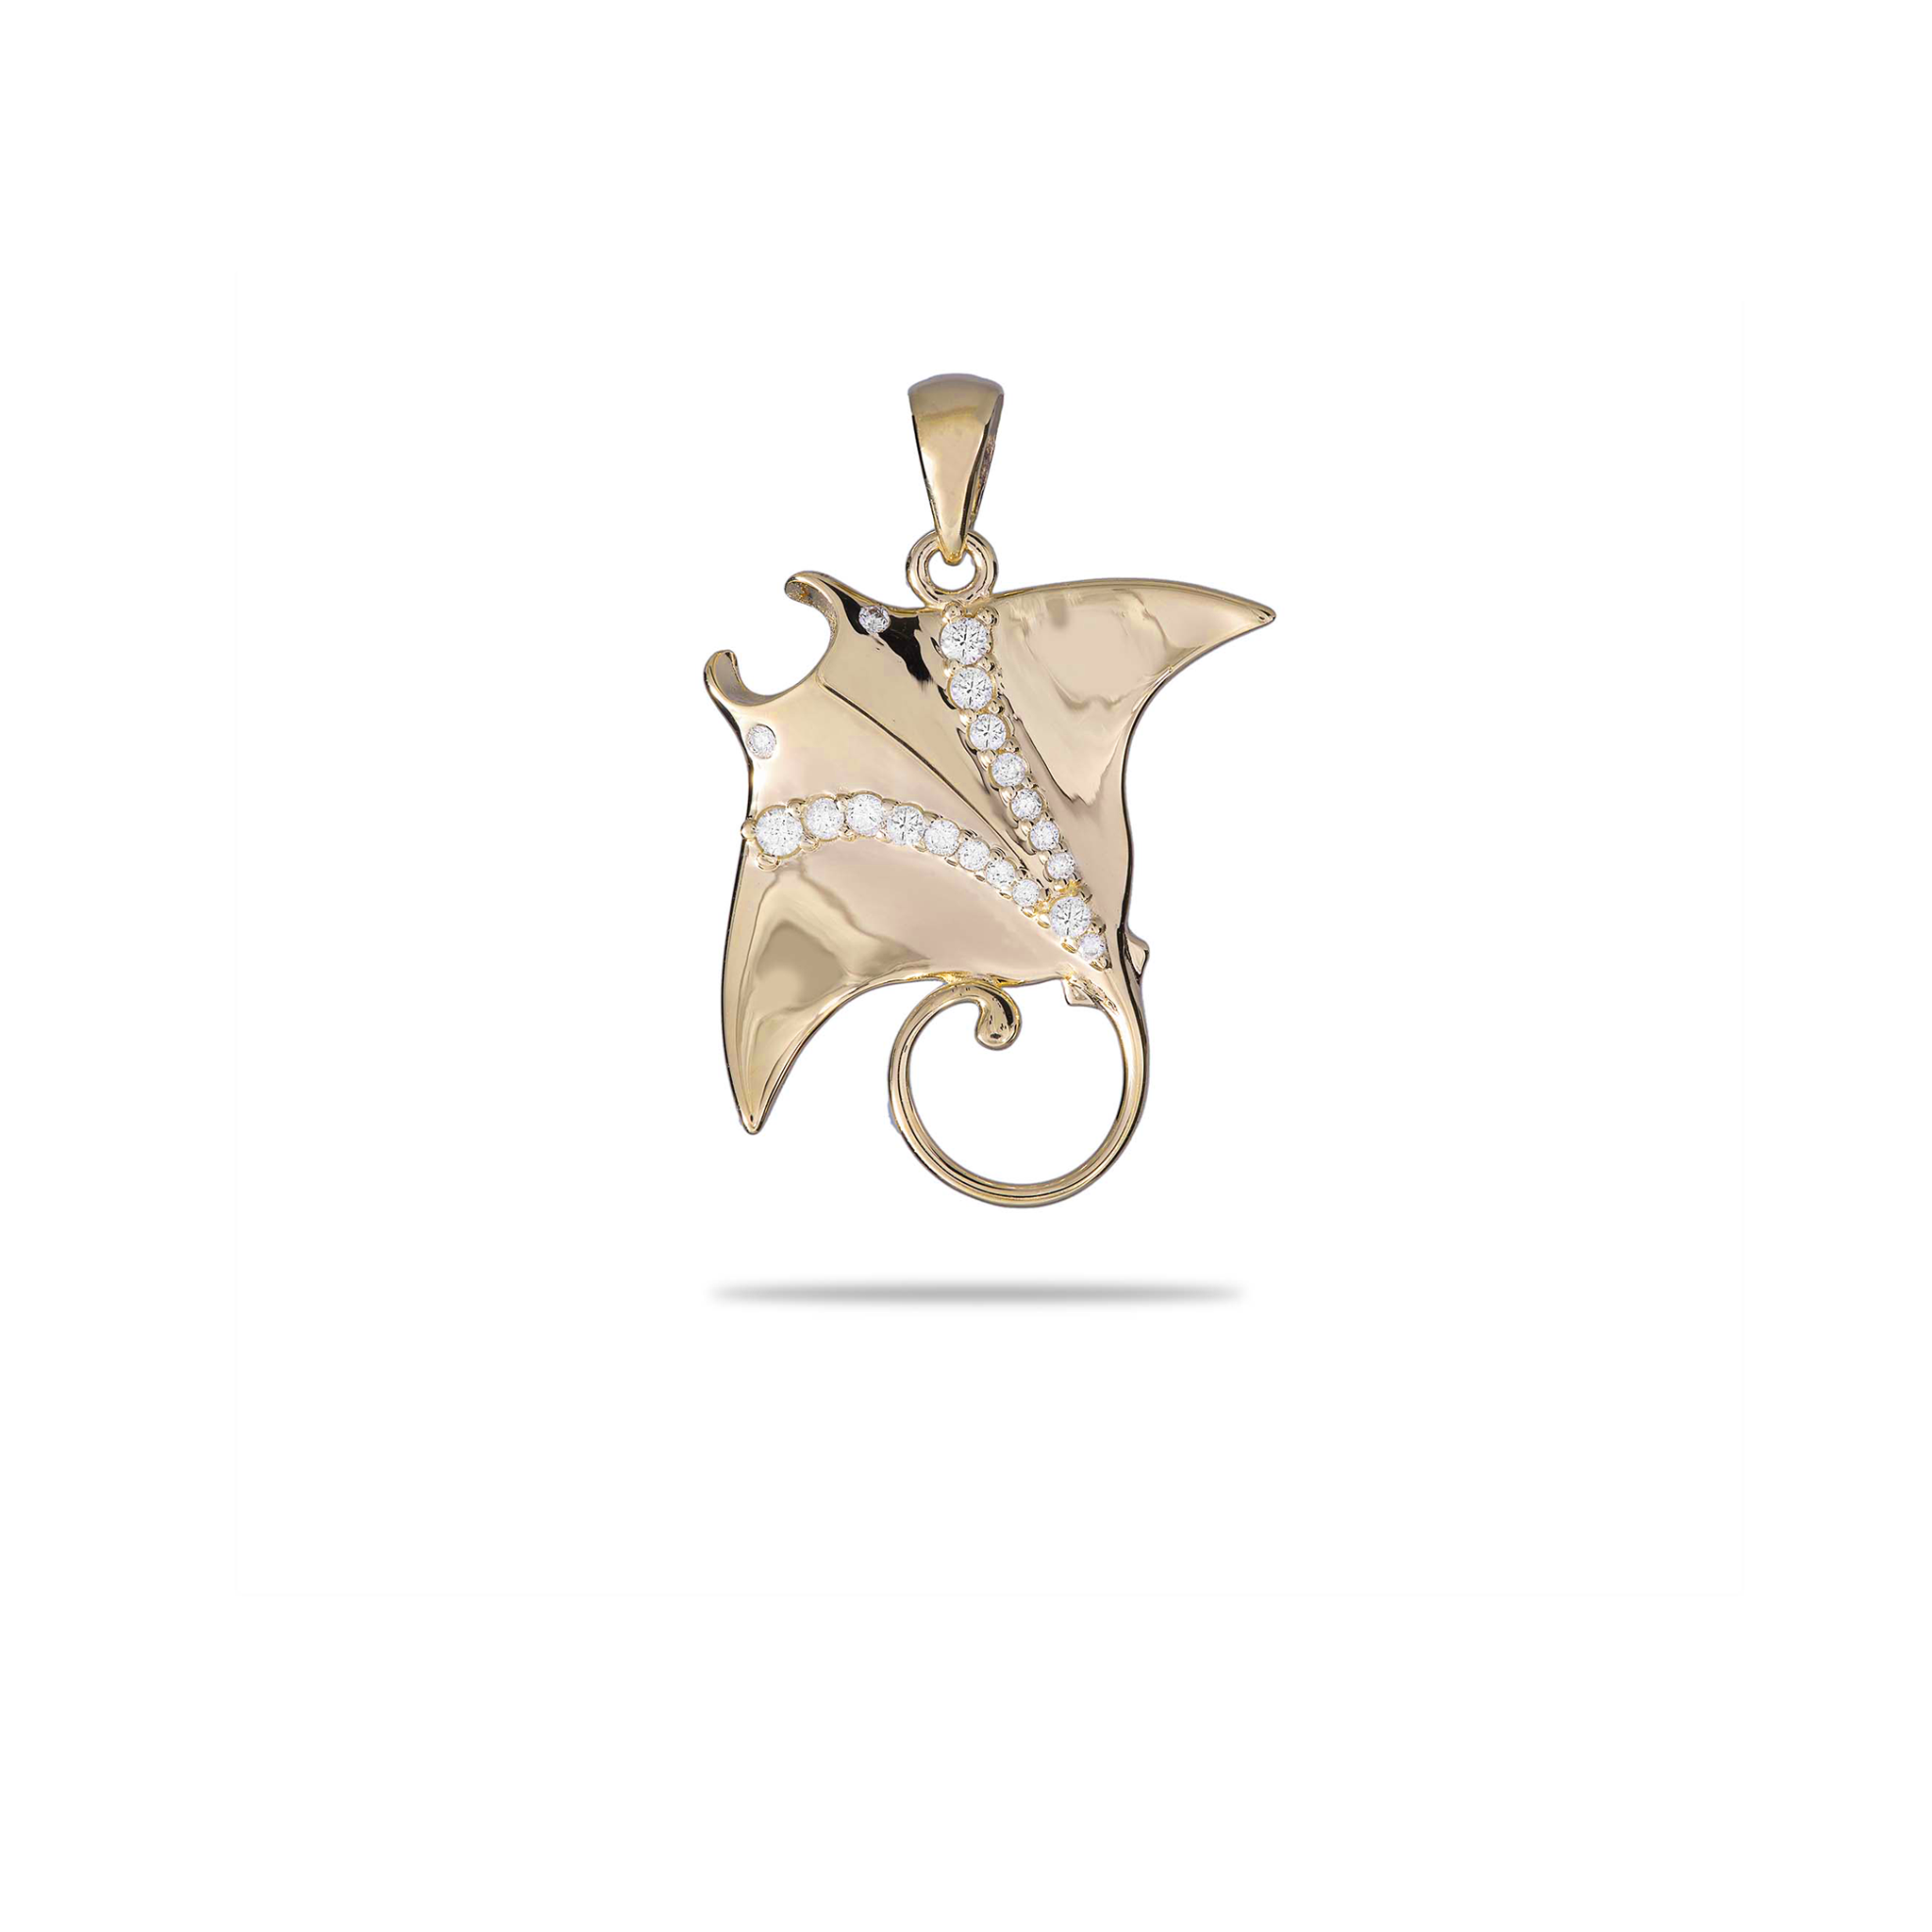 Ocean Dance Manta Ray Pendant in Gold with Diamonds - 21mm